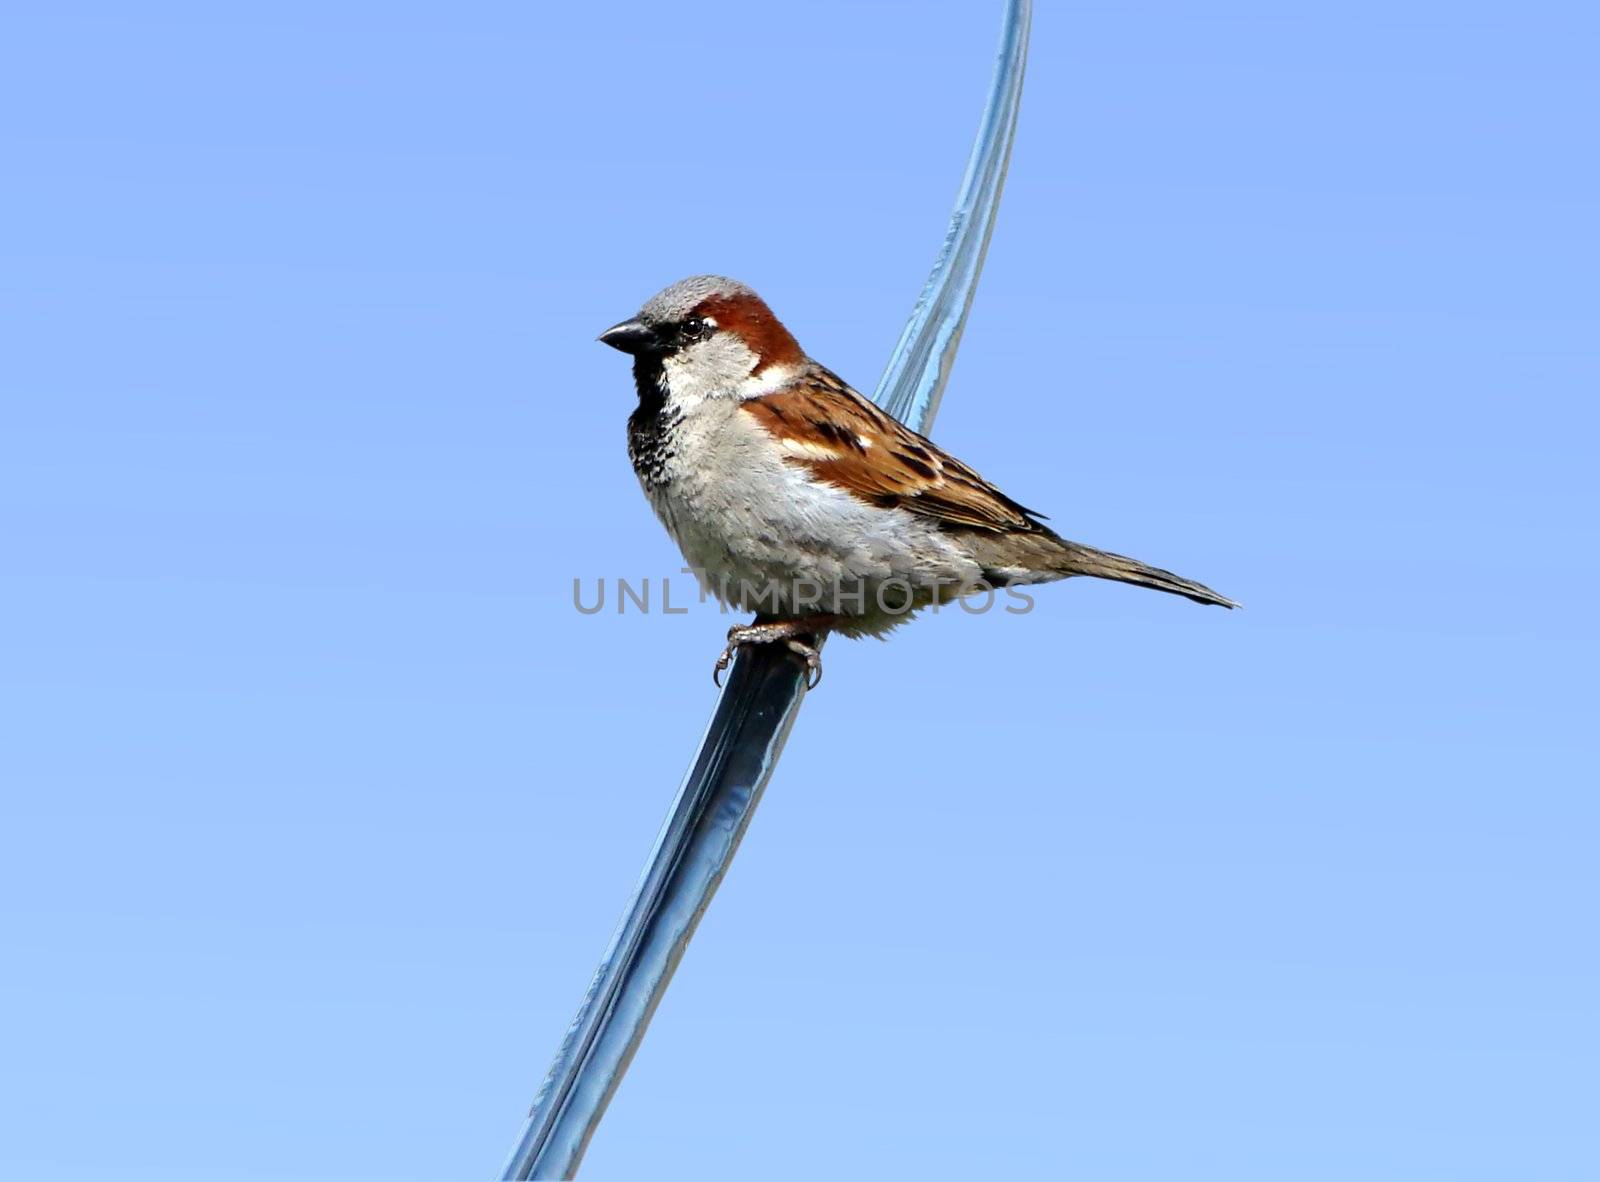 Common male house sparrow resting on an electrical wire in the city against blue sky.